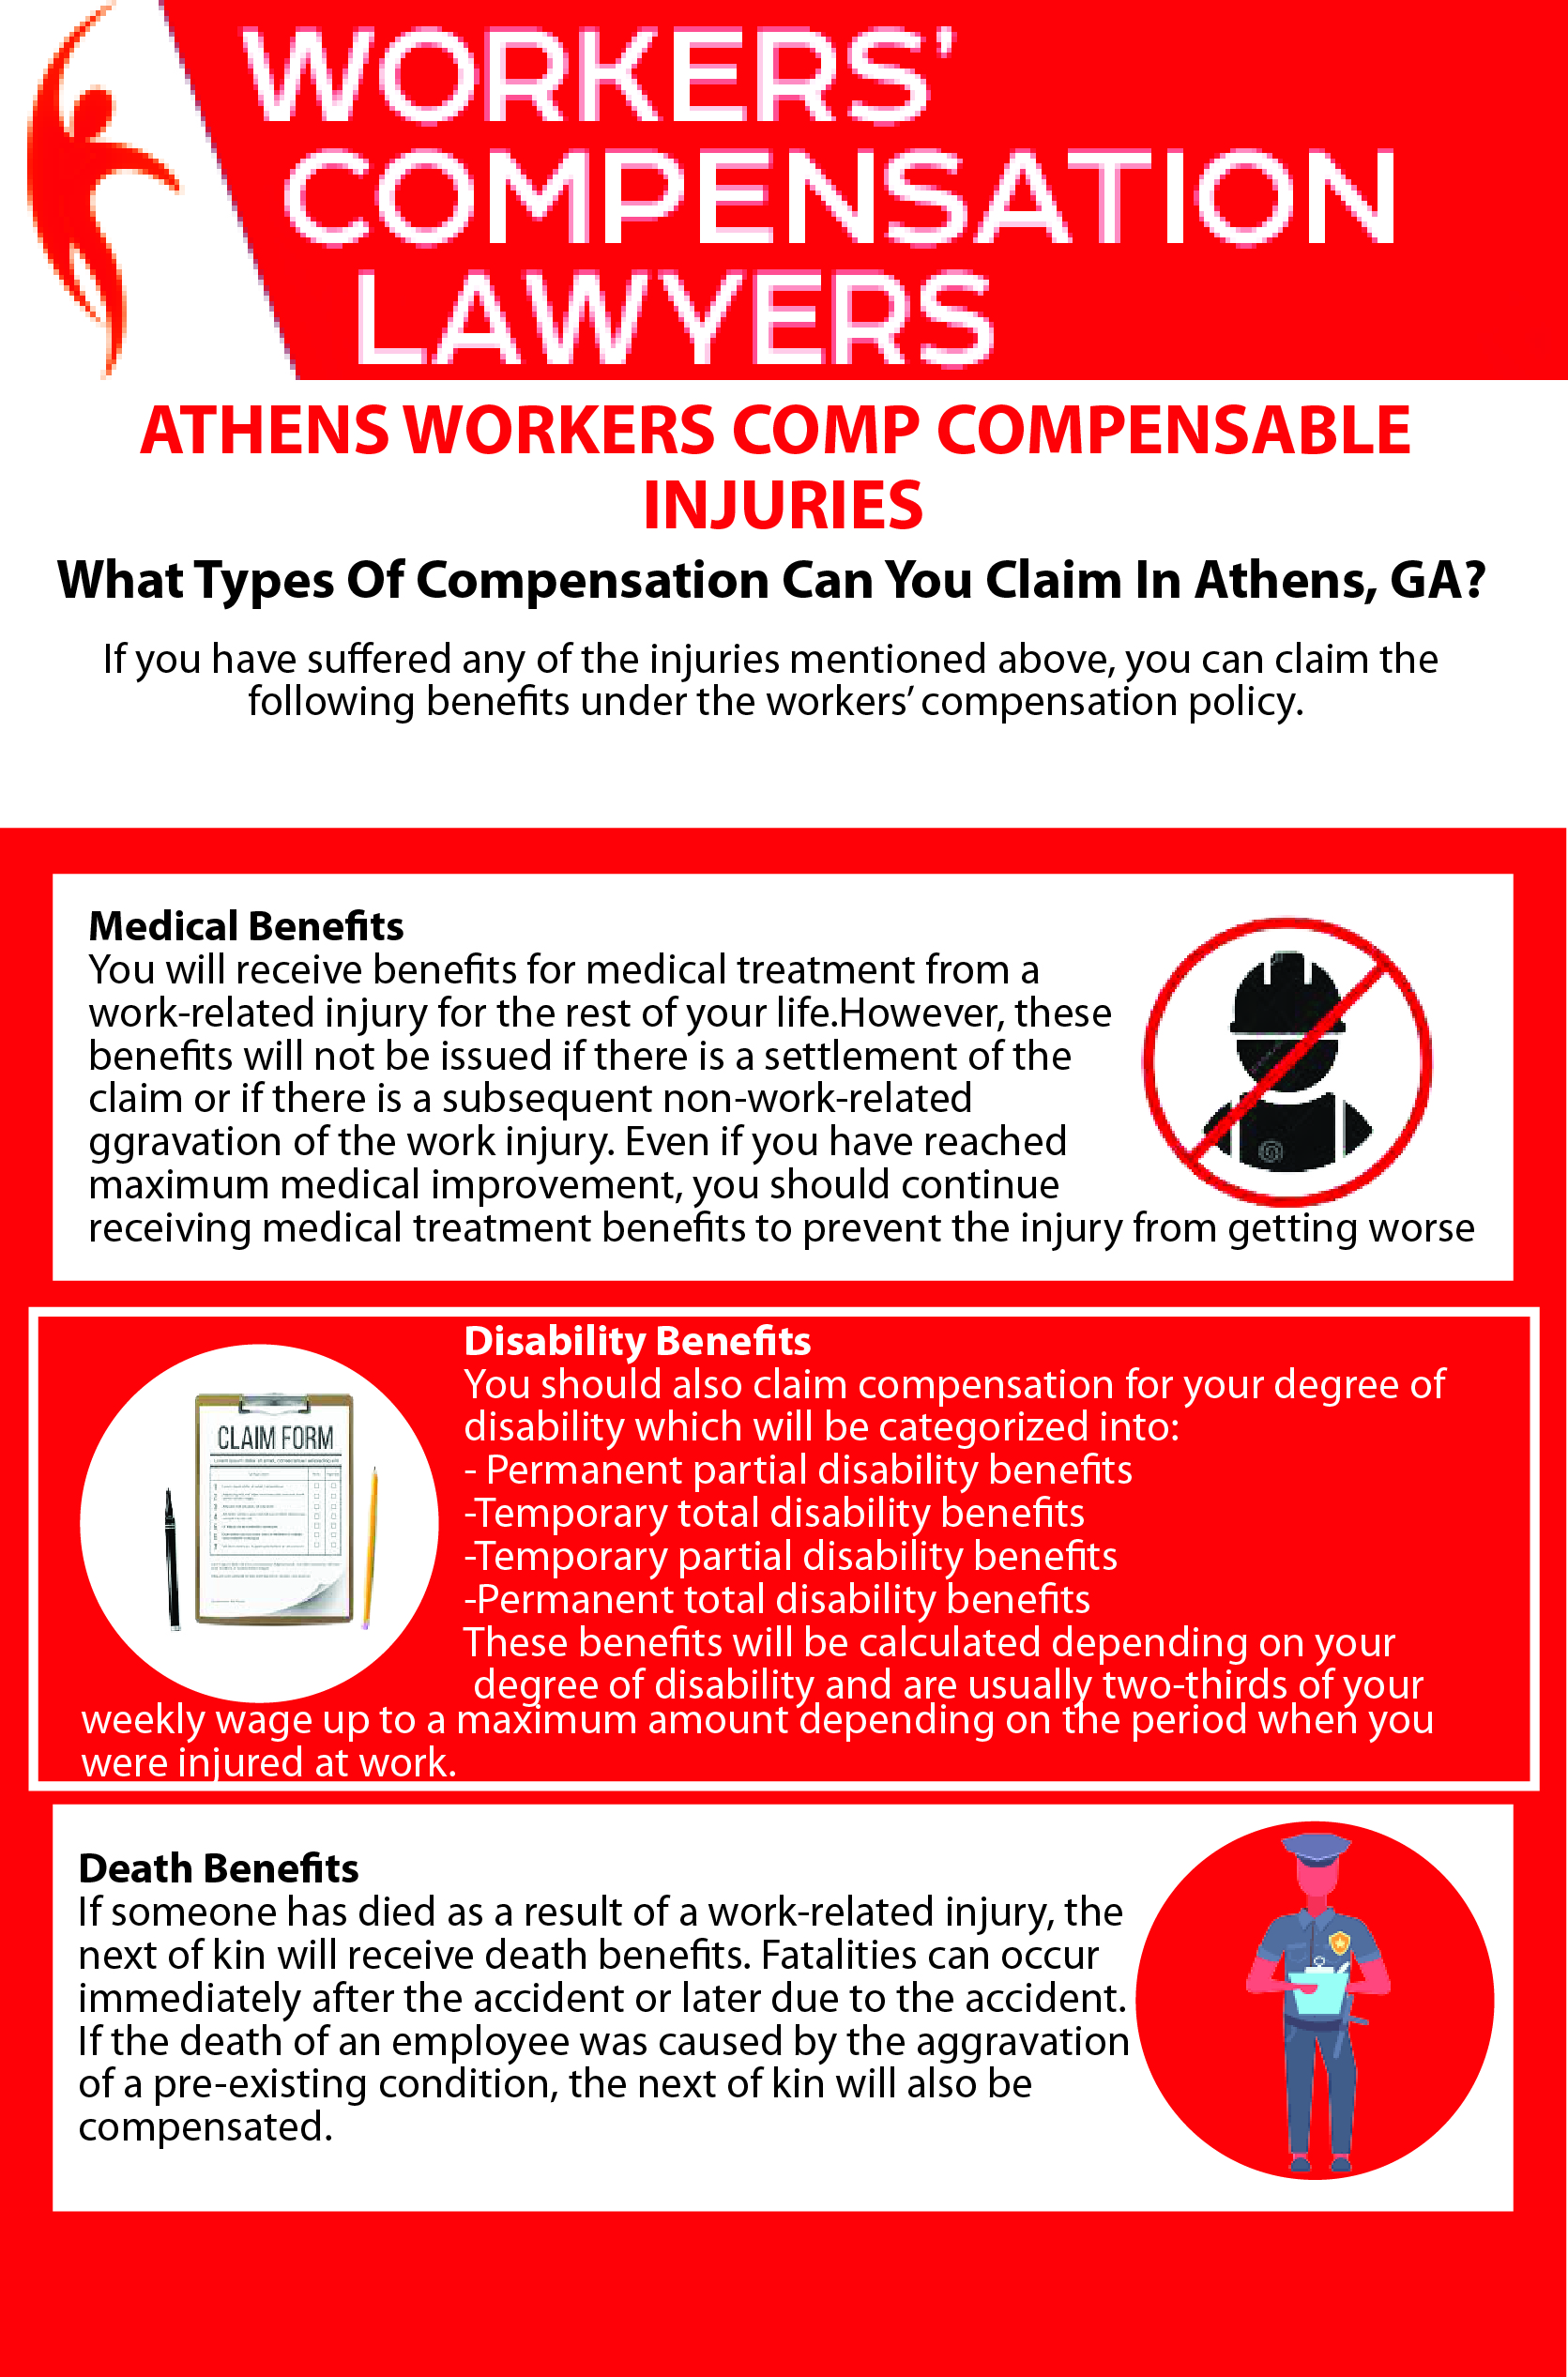 Athens Workers Compensation Compensable Injuries Infographic